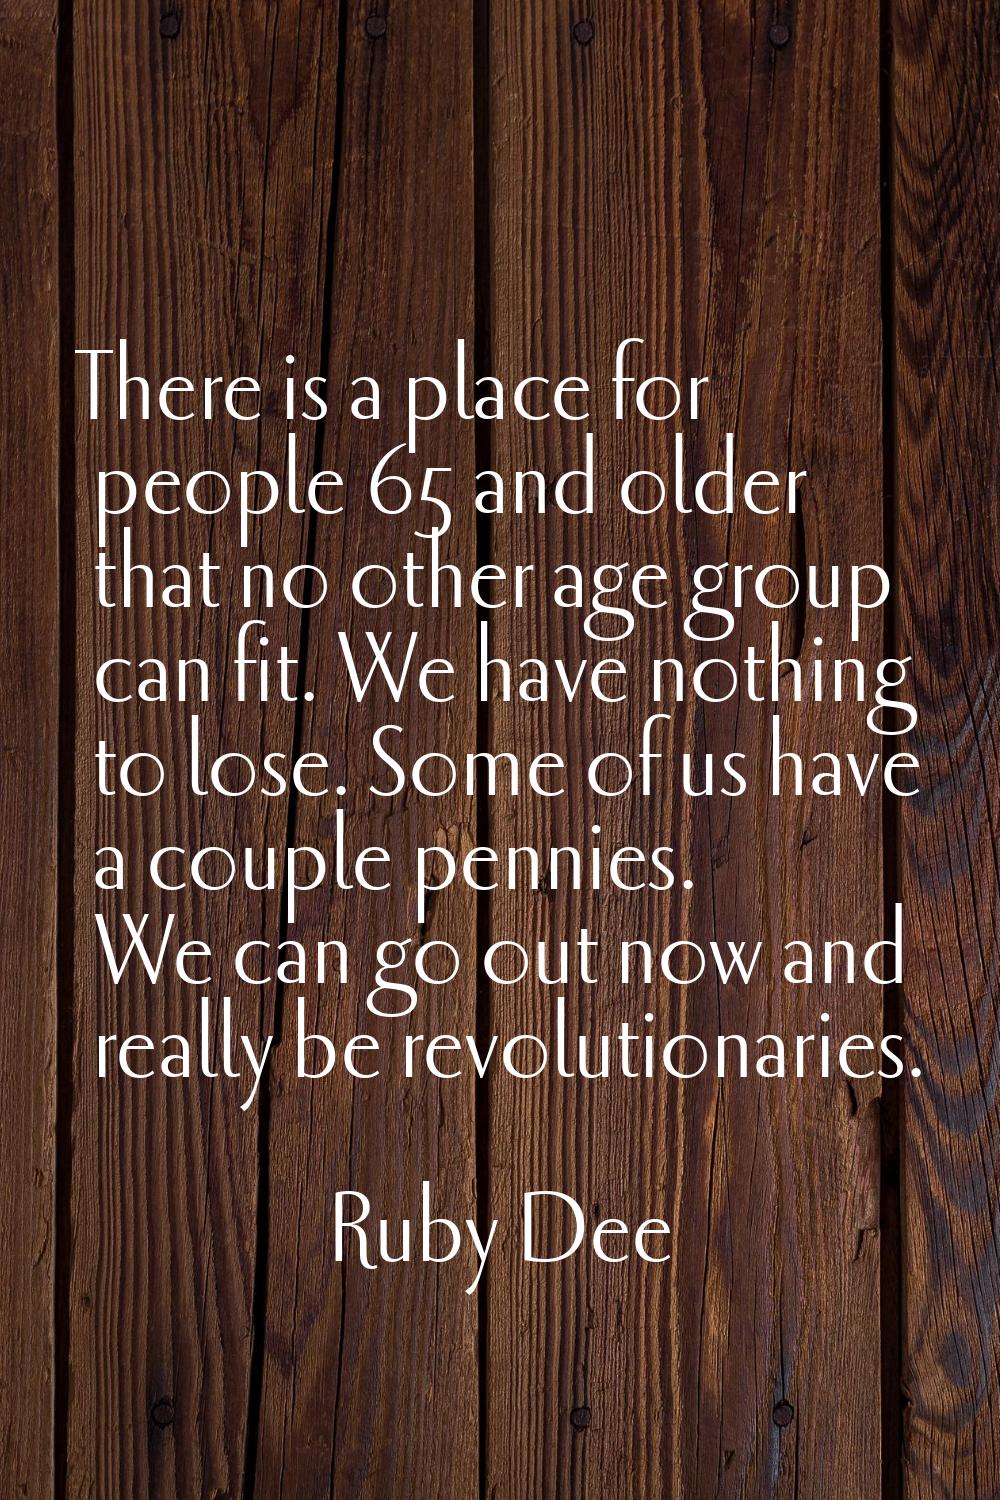 There is a place for people 65 and older that no other age group can fit. We have nothing to lose. 